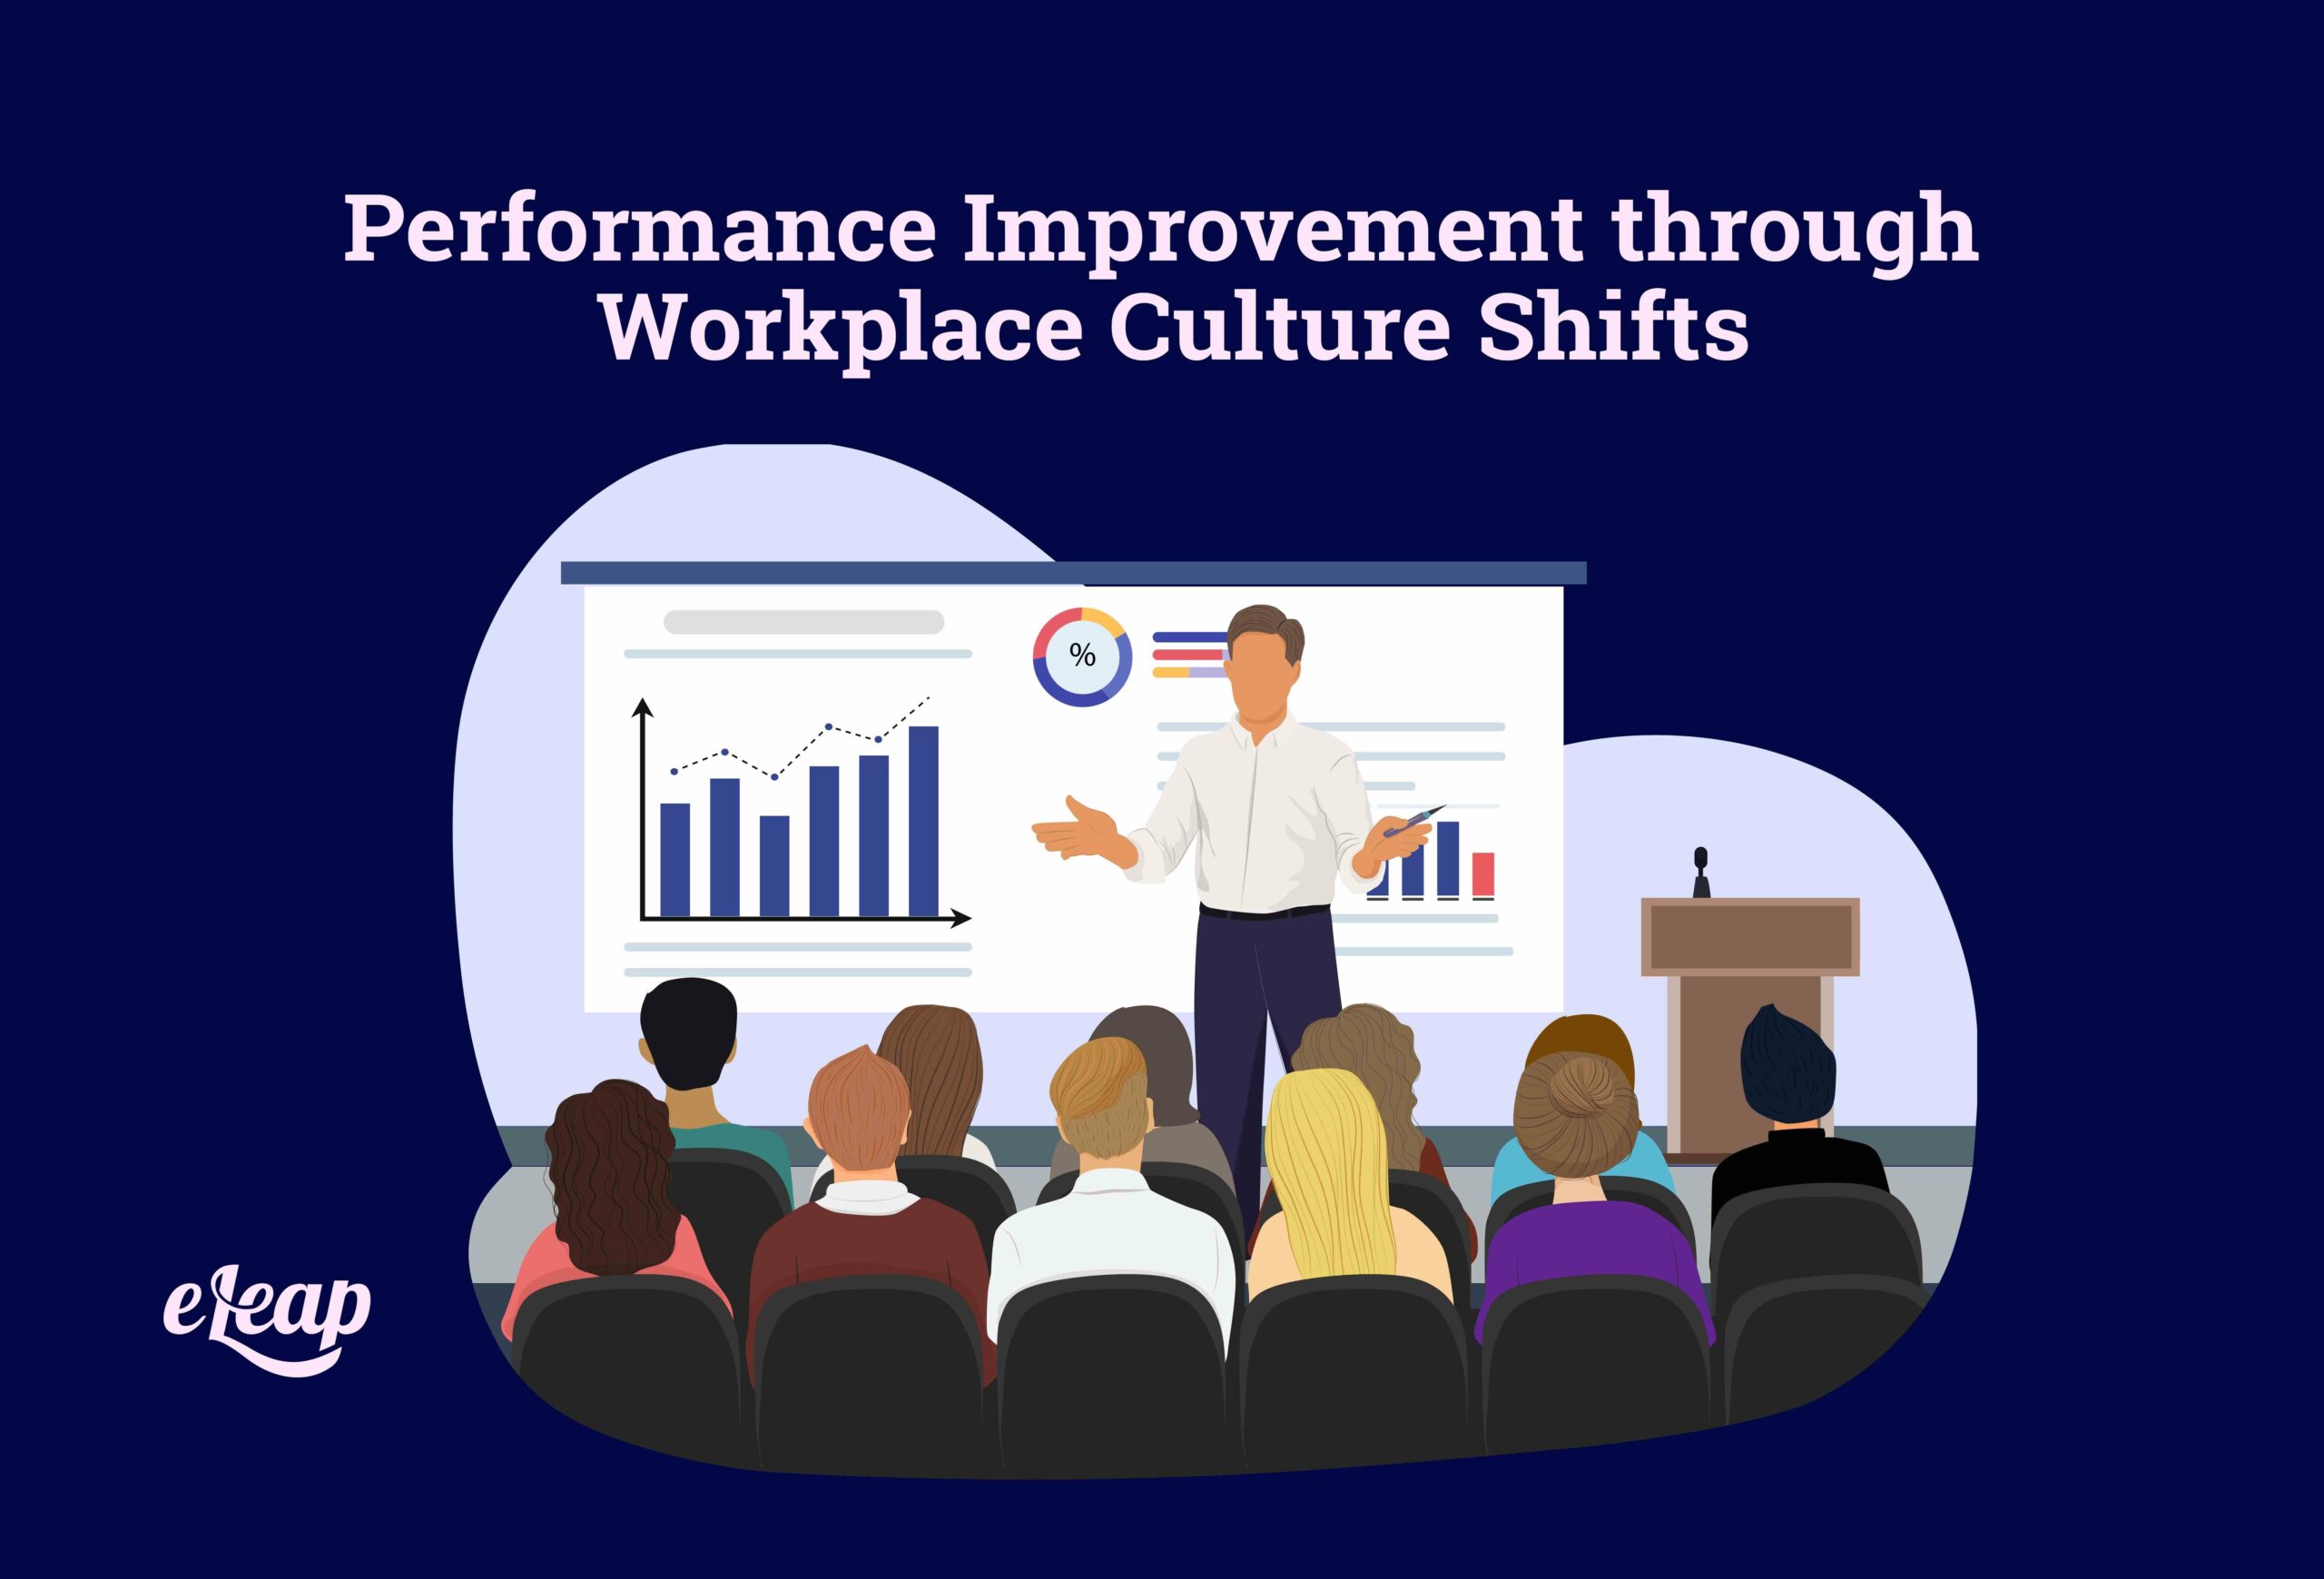 Performance Improvement through Workplace Culture Shifts